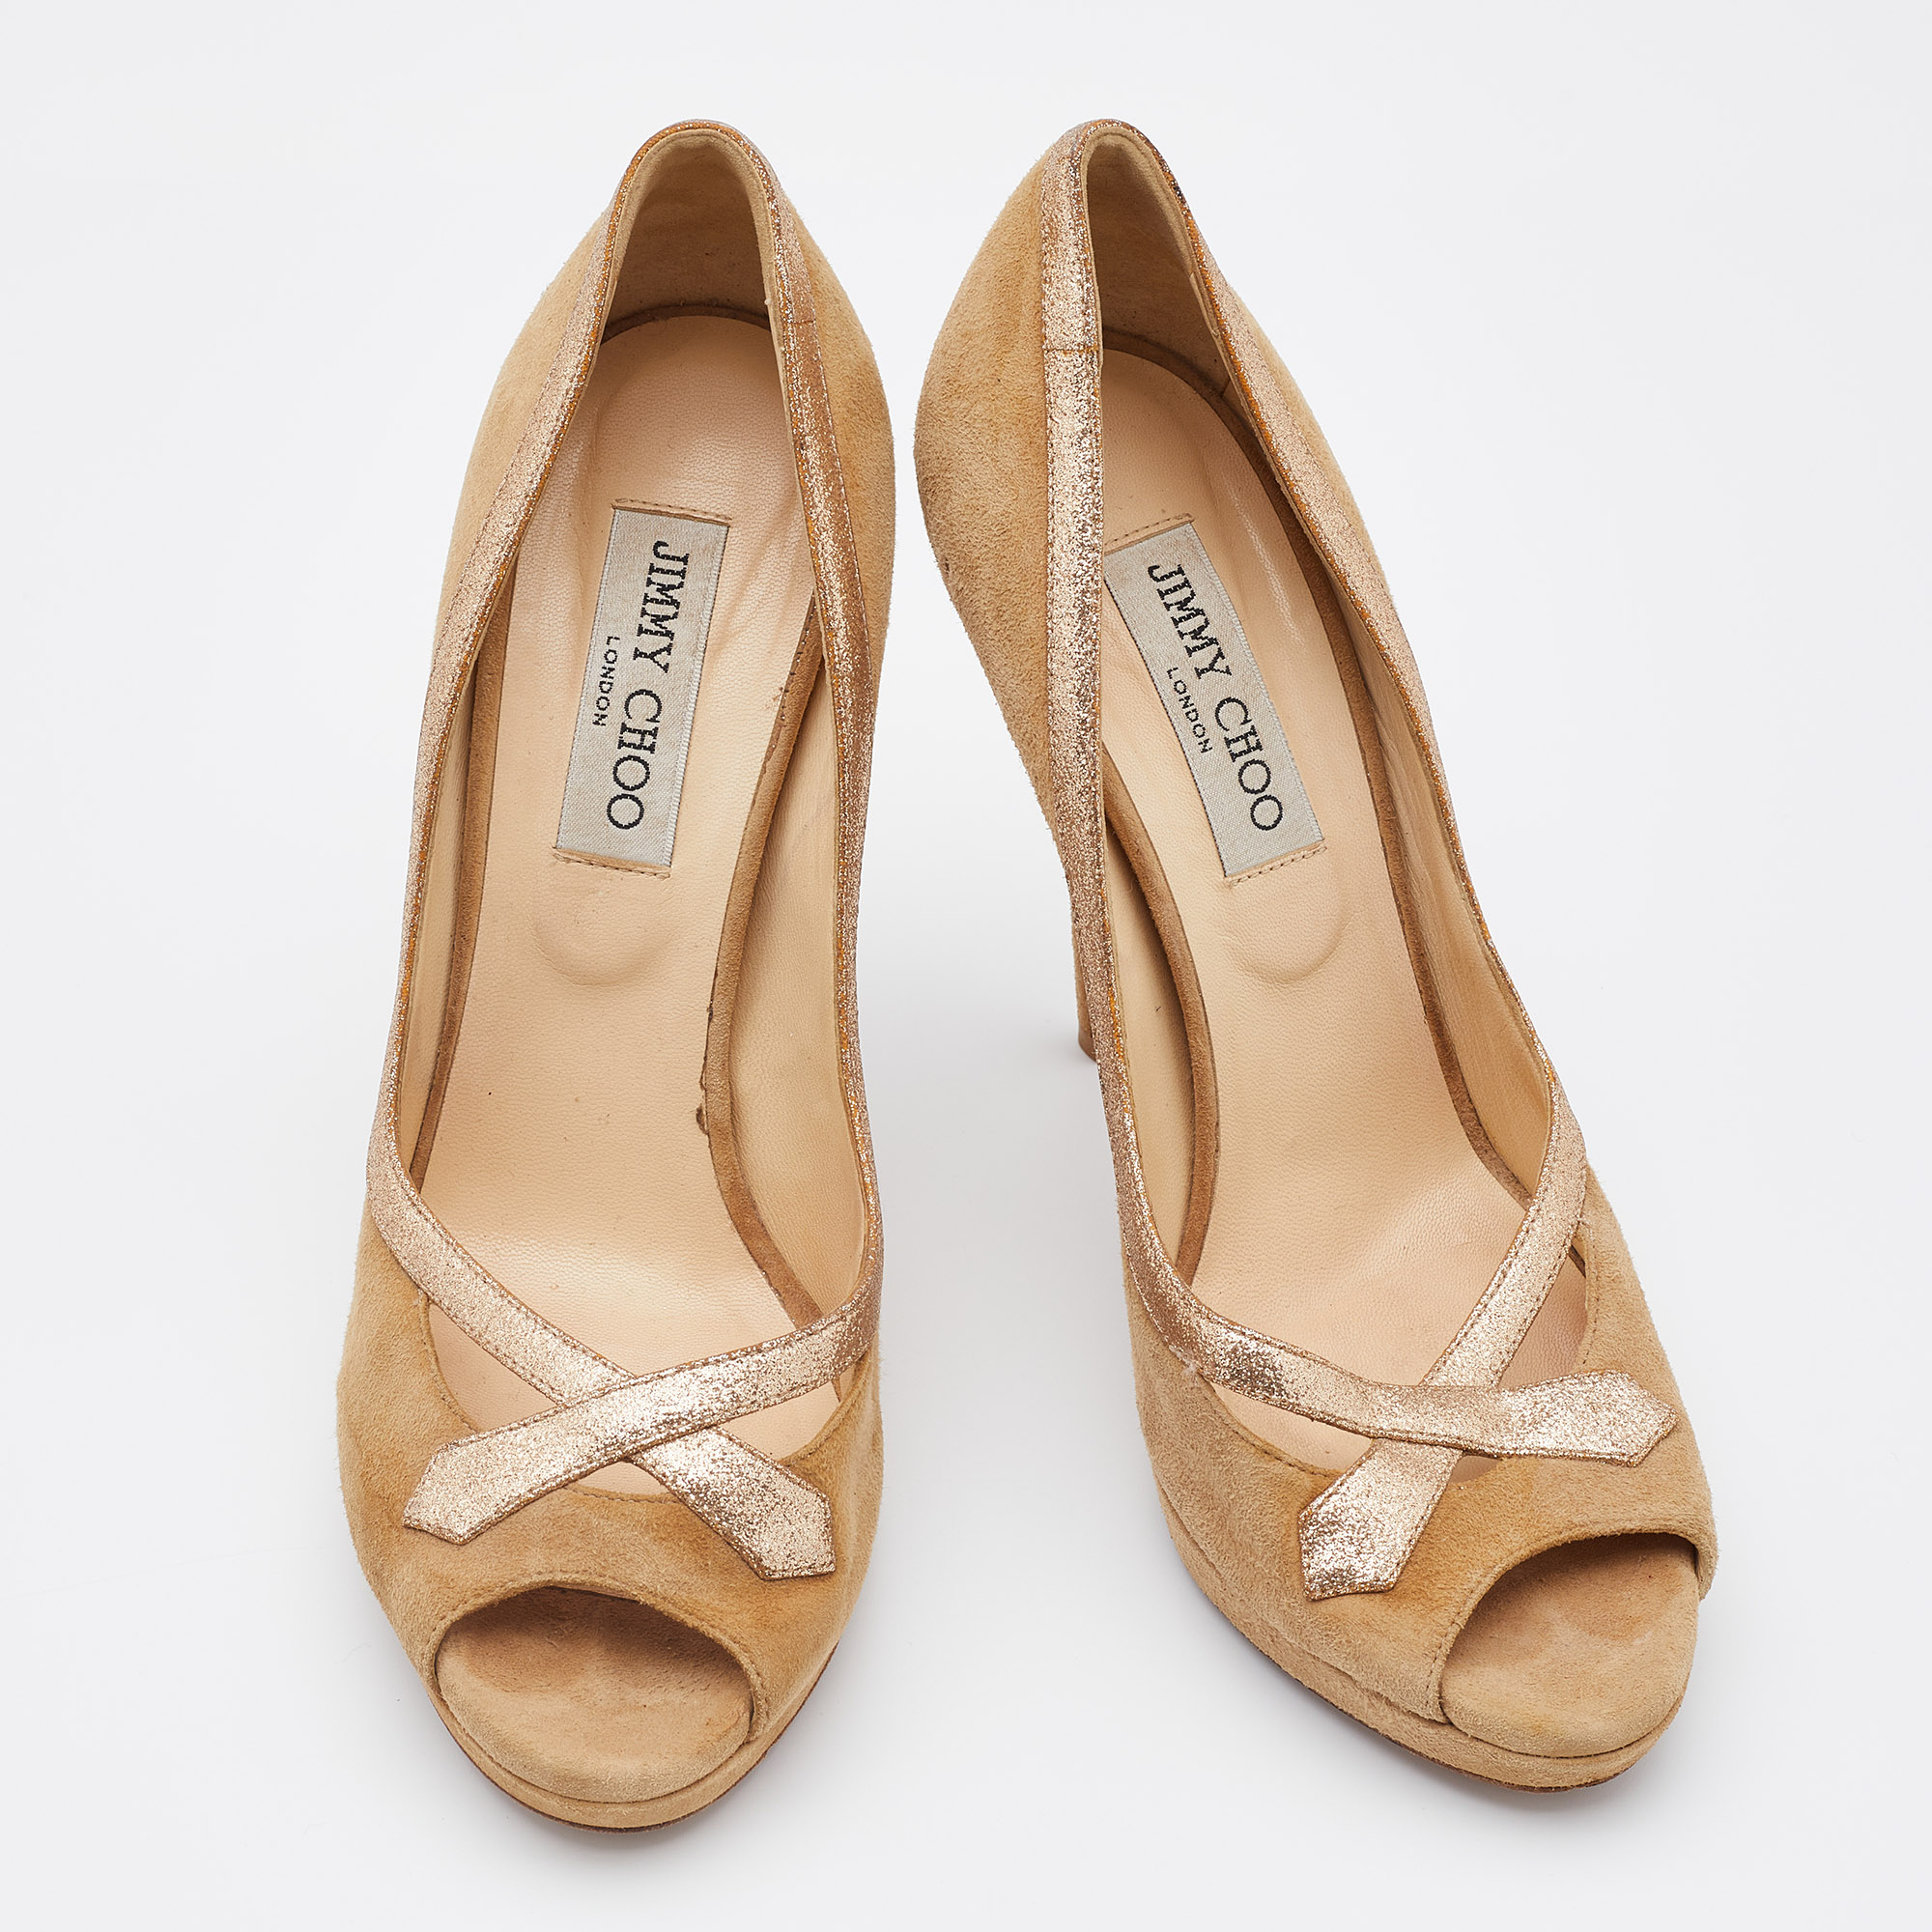 Jimmy Choo Beige/Gold Suede And Leather Open Toe Pumps Size 39.5